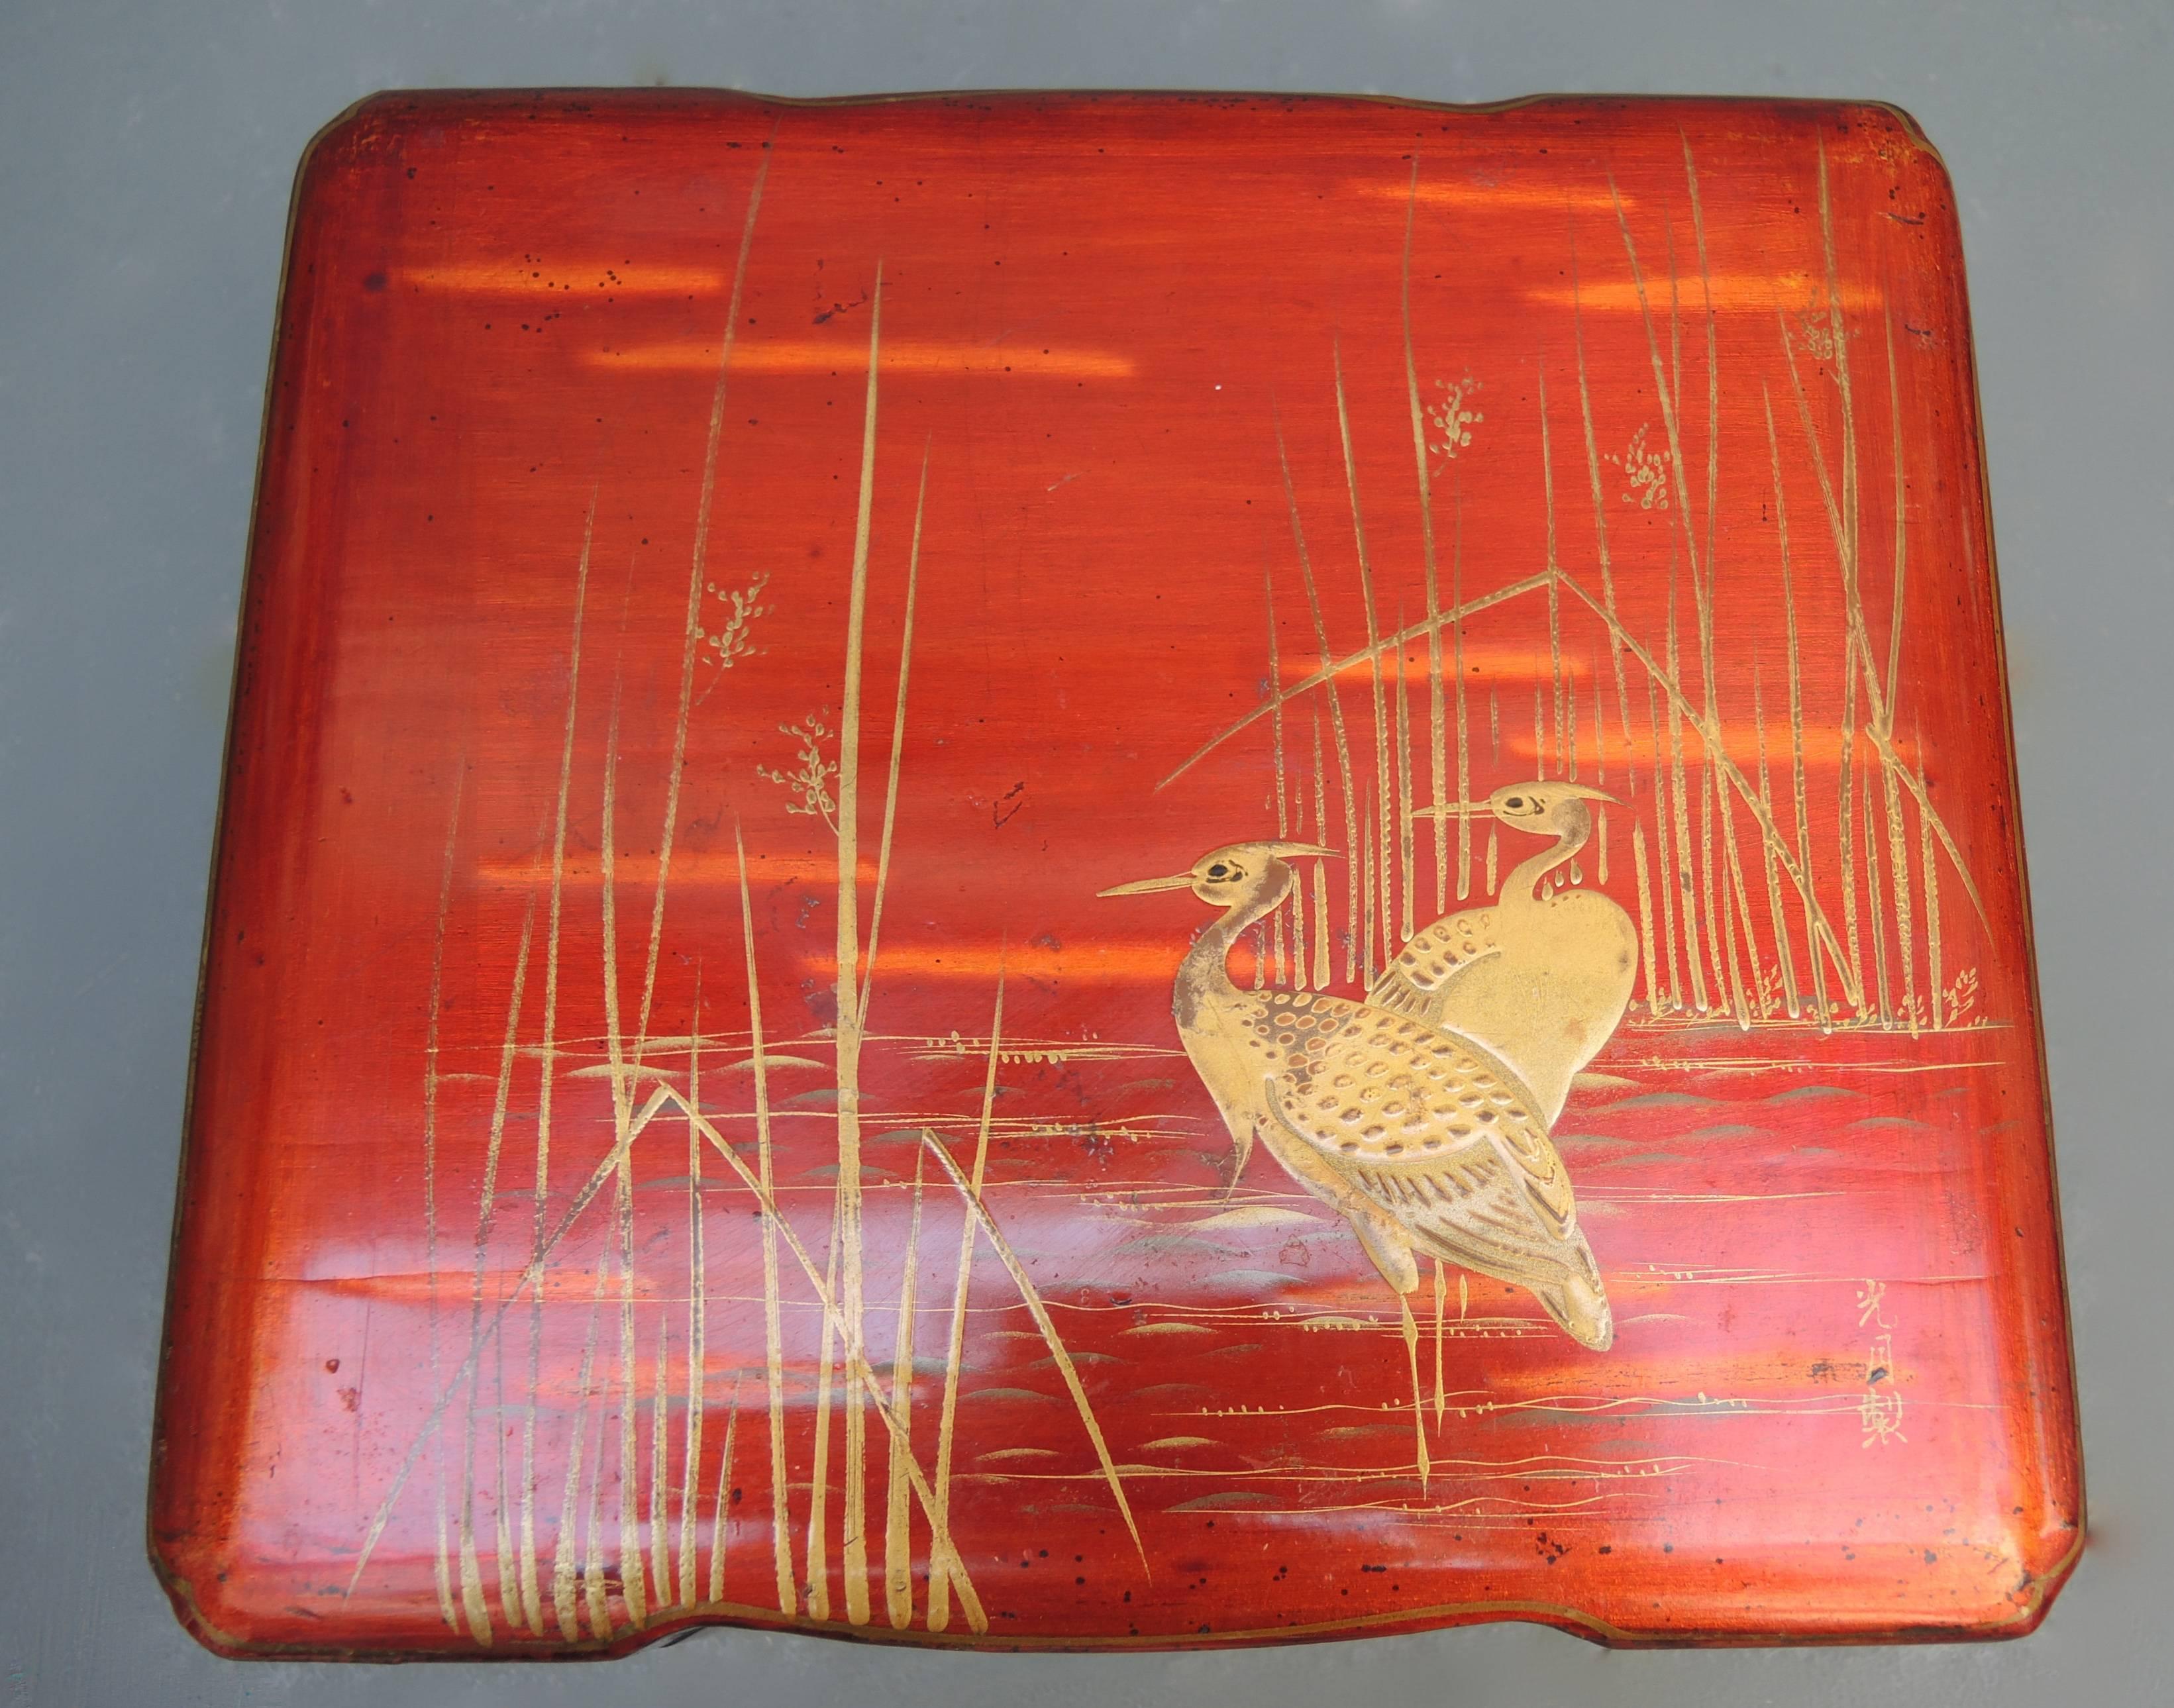 Japanese lacquered wood box in a rich burnt orange color with a scene of cranes in the marsh painted in gold and signed lower right, circa 1920.